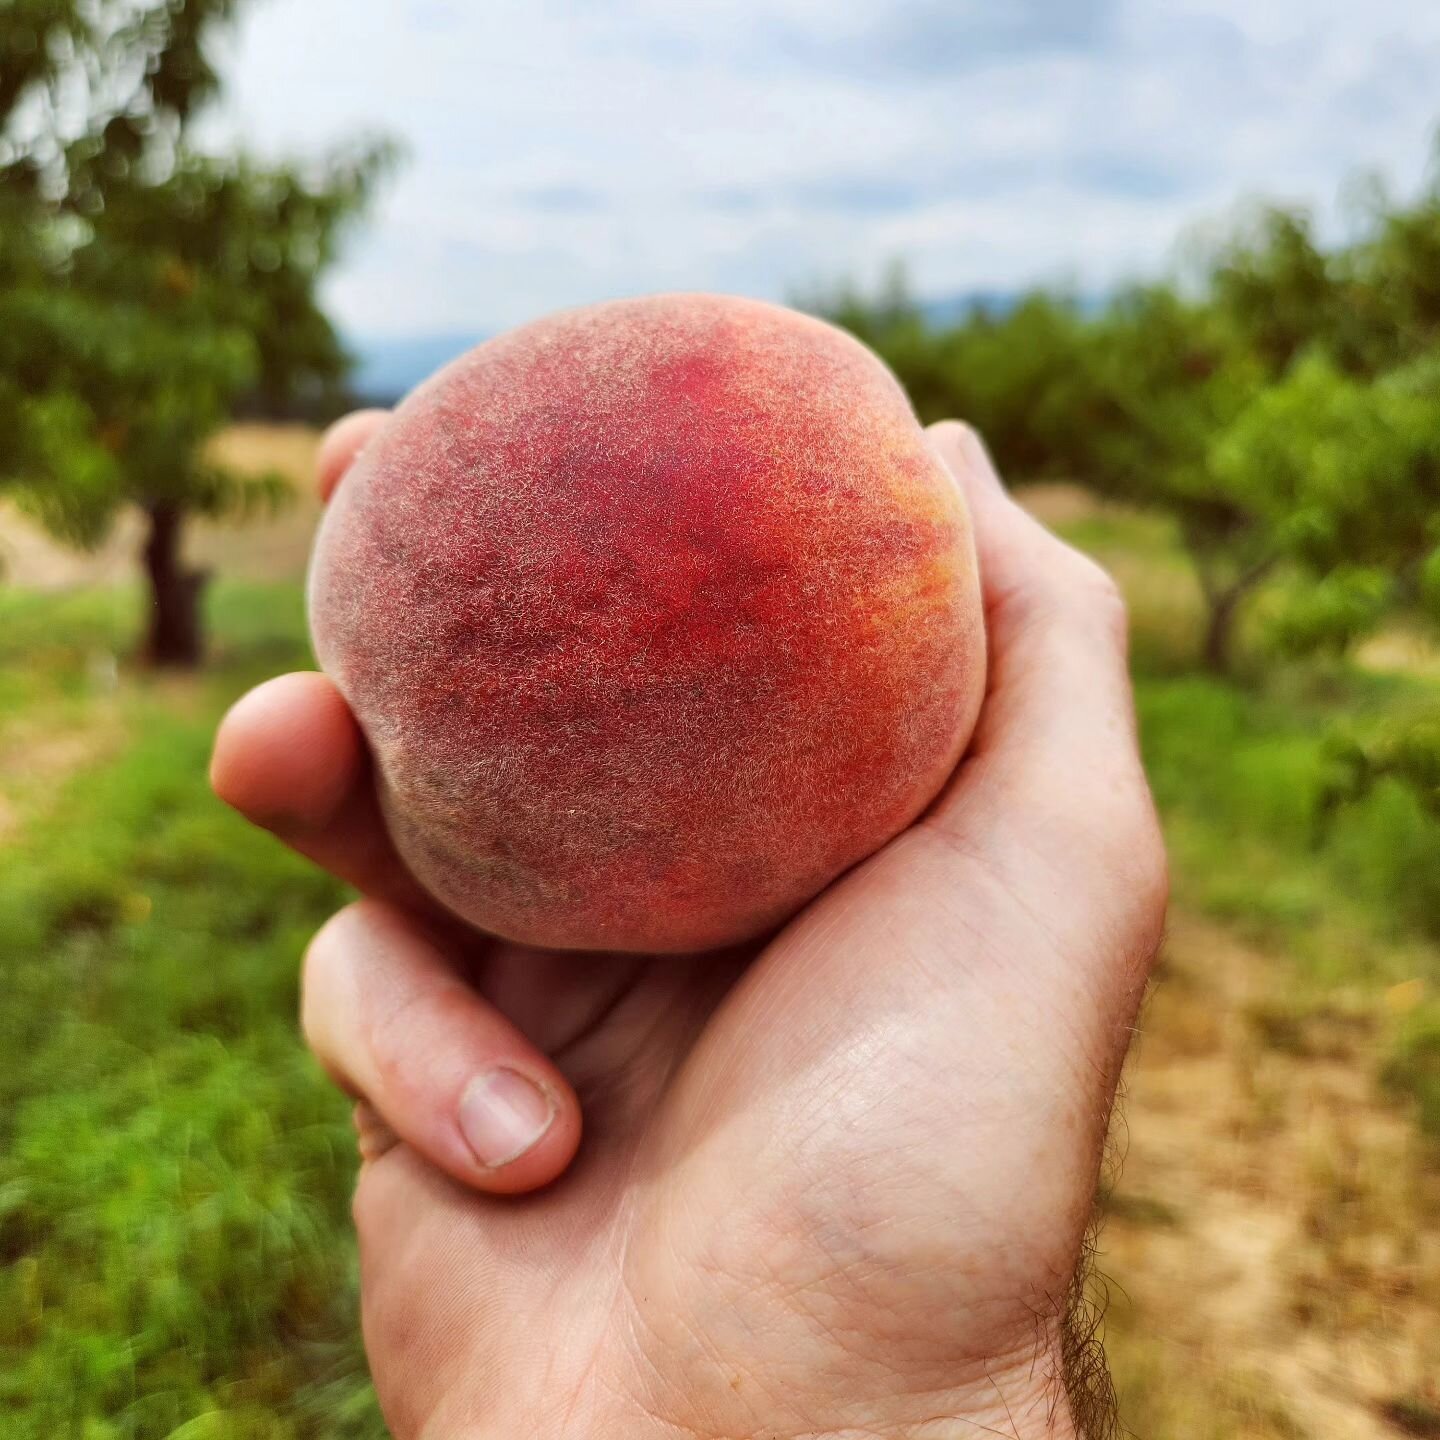 See you tomorrow (Wednesday 8/9) at the Spokane Farmer's Market with Sun Glow apricots &amp; Red Haven peaches!
🌞🍑🌞🍑🌞🍑🌞🍑🌞🍑🌞🍑